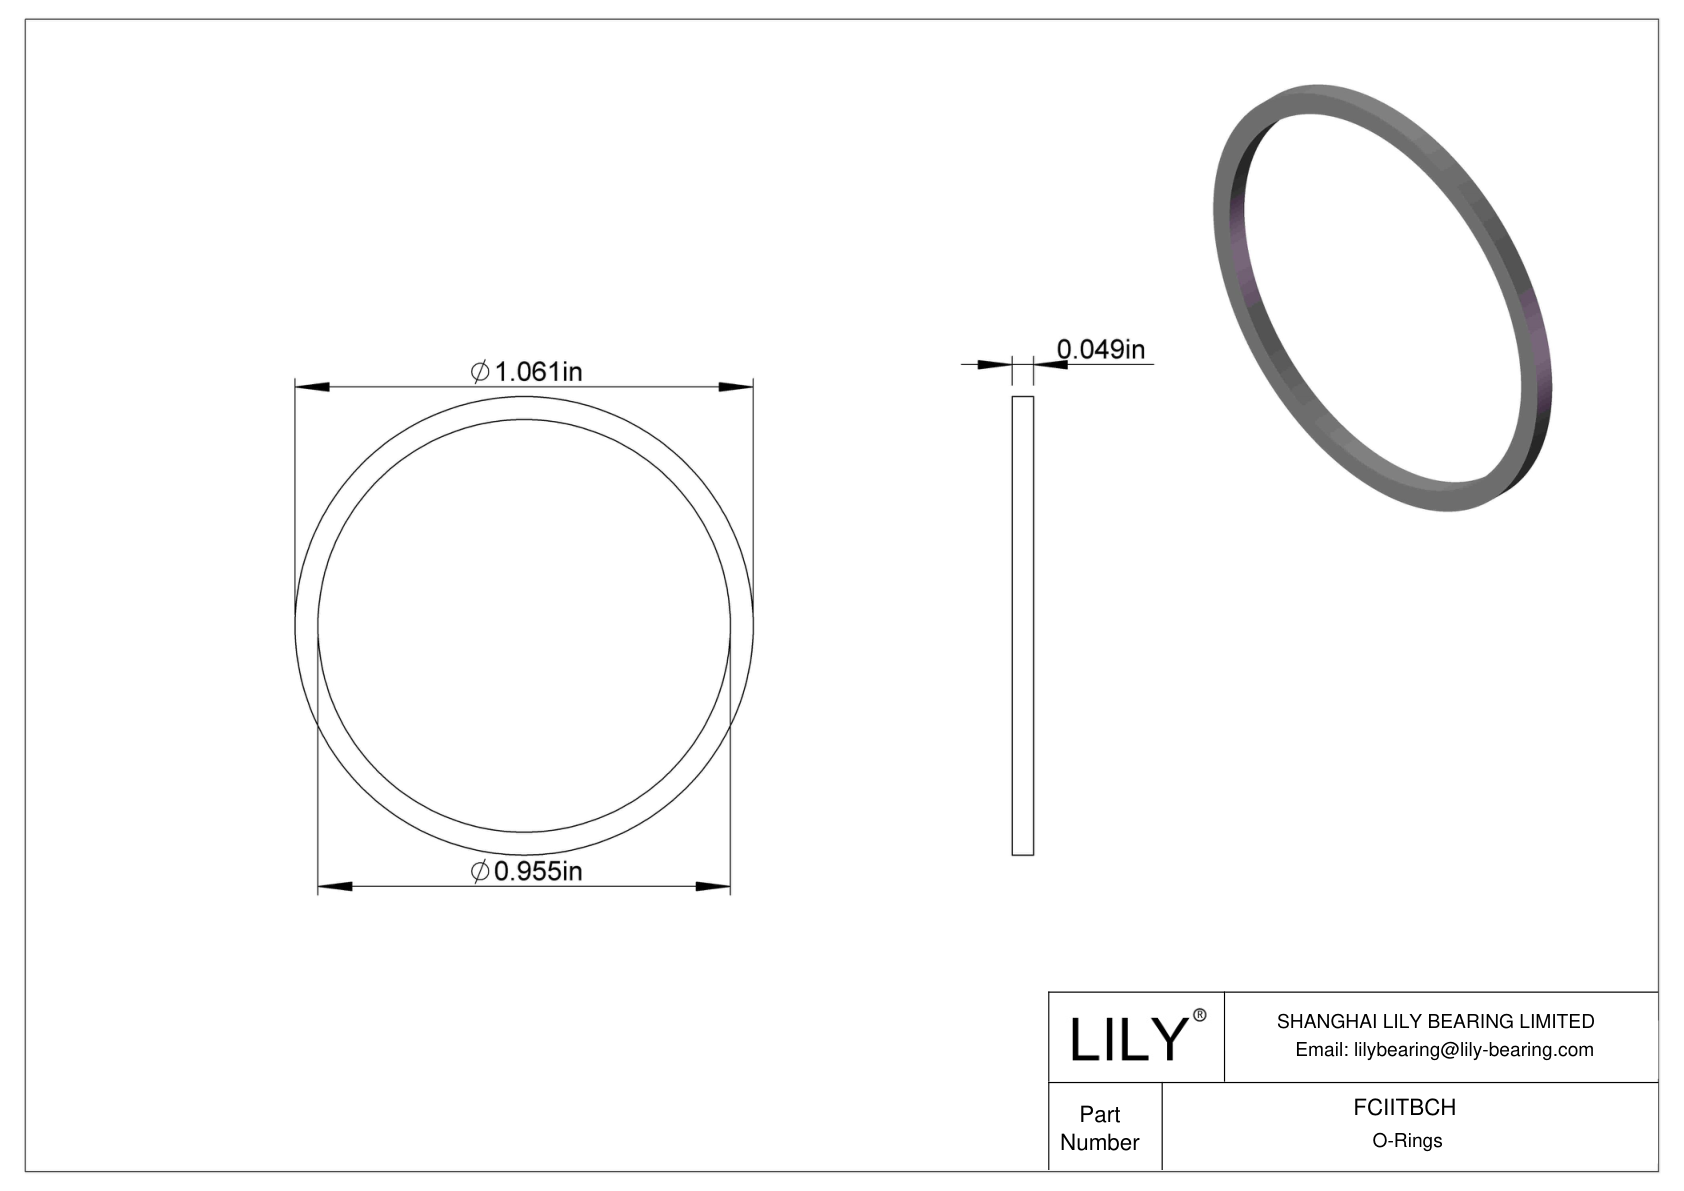 FCIITBCH O-Ring Backup Rings cad drawing